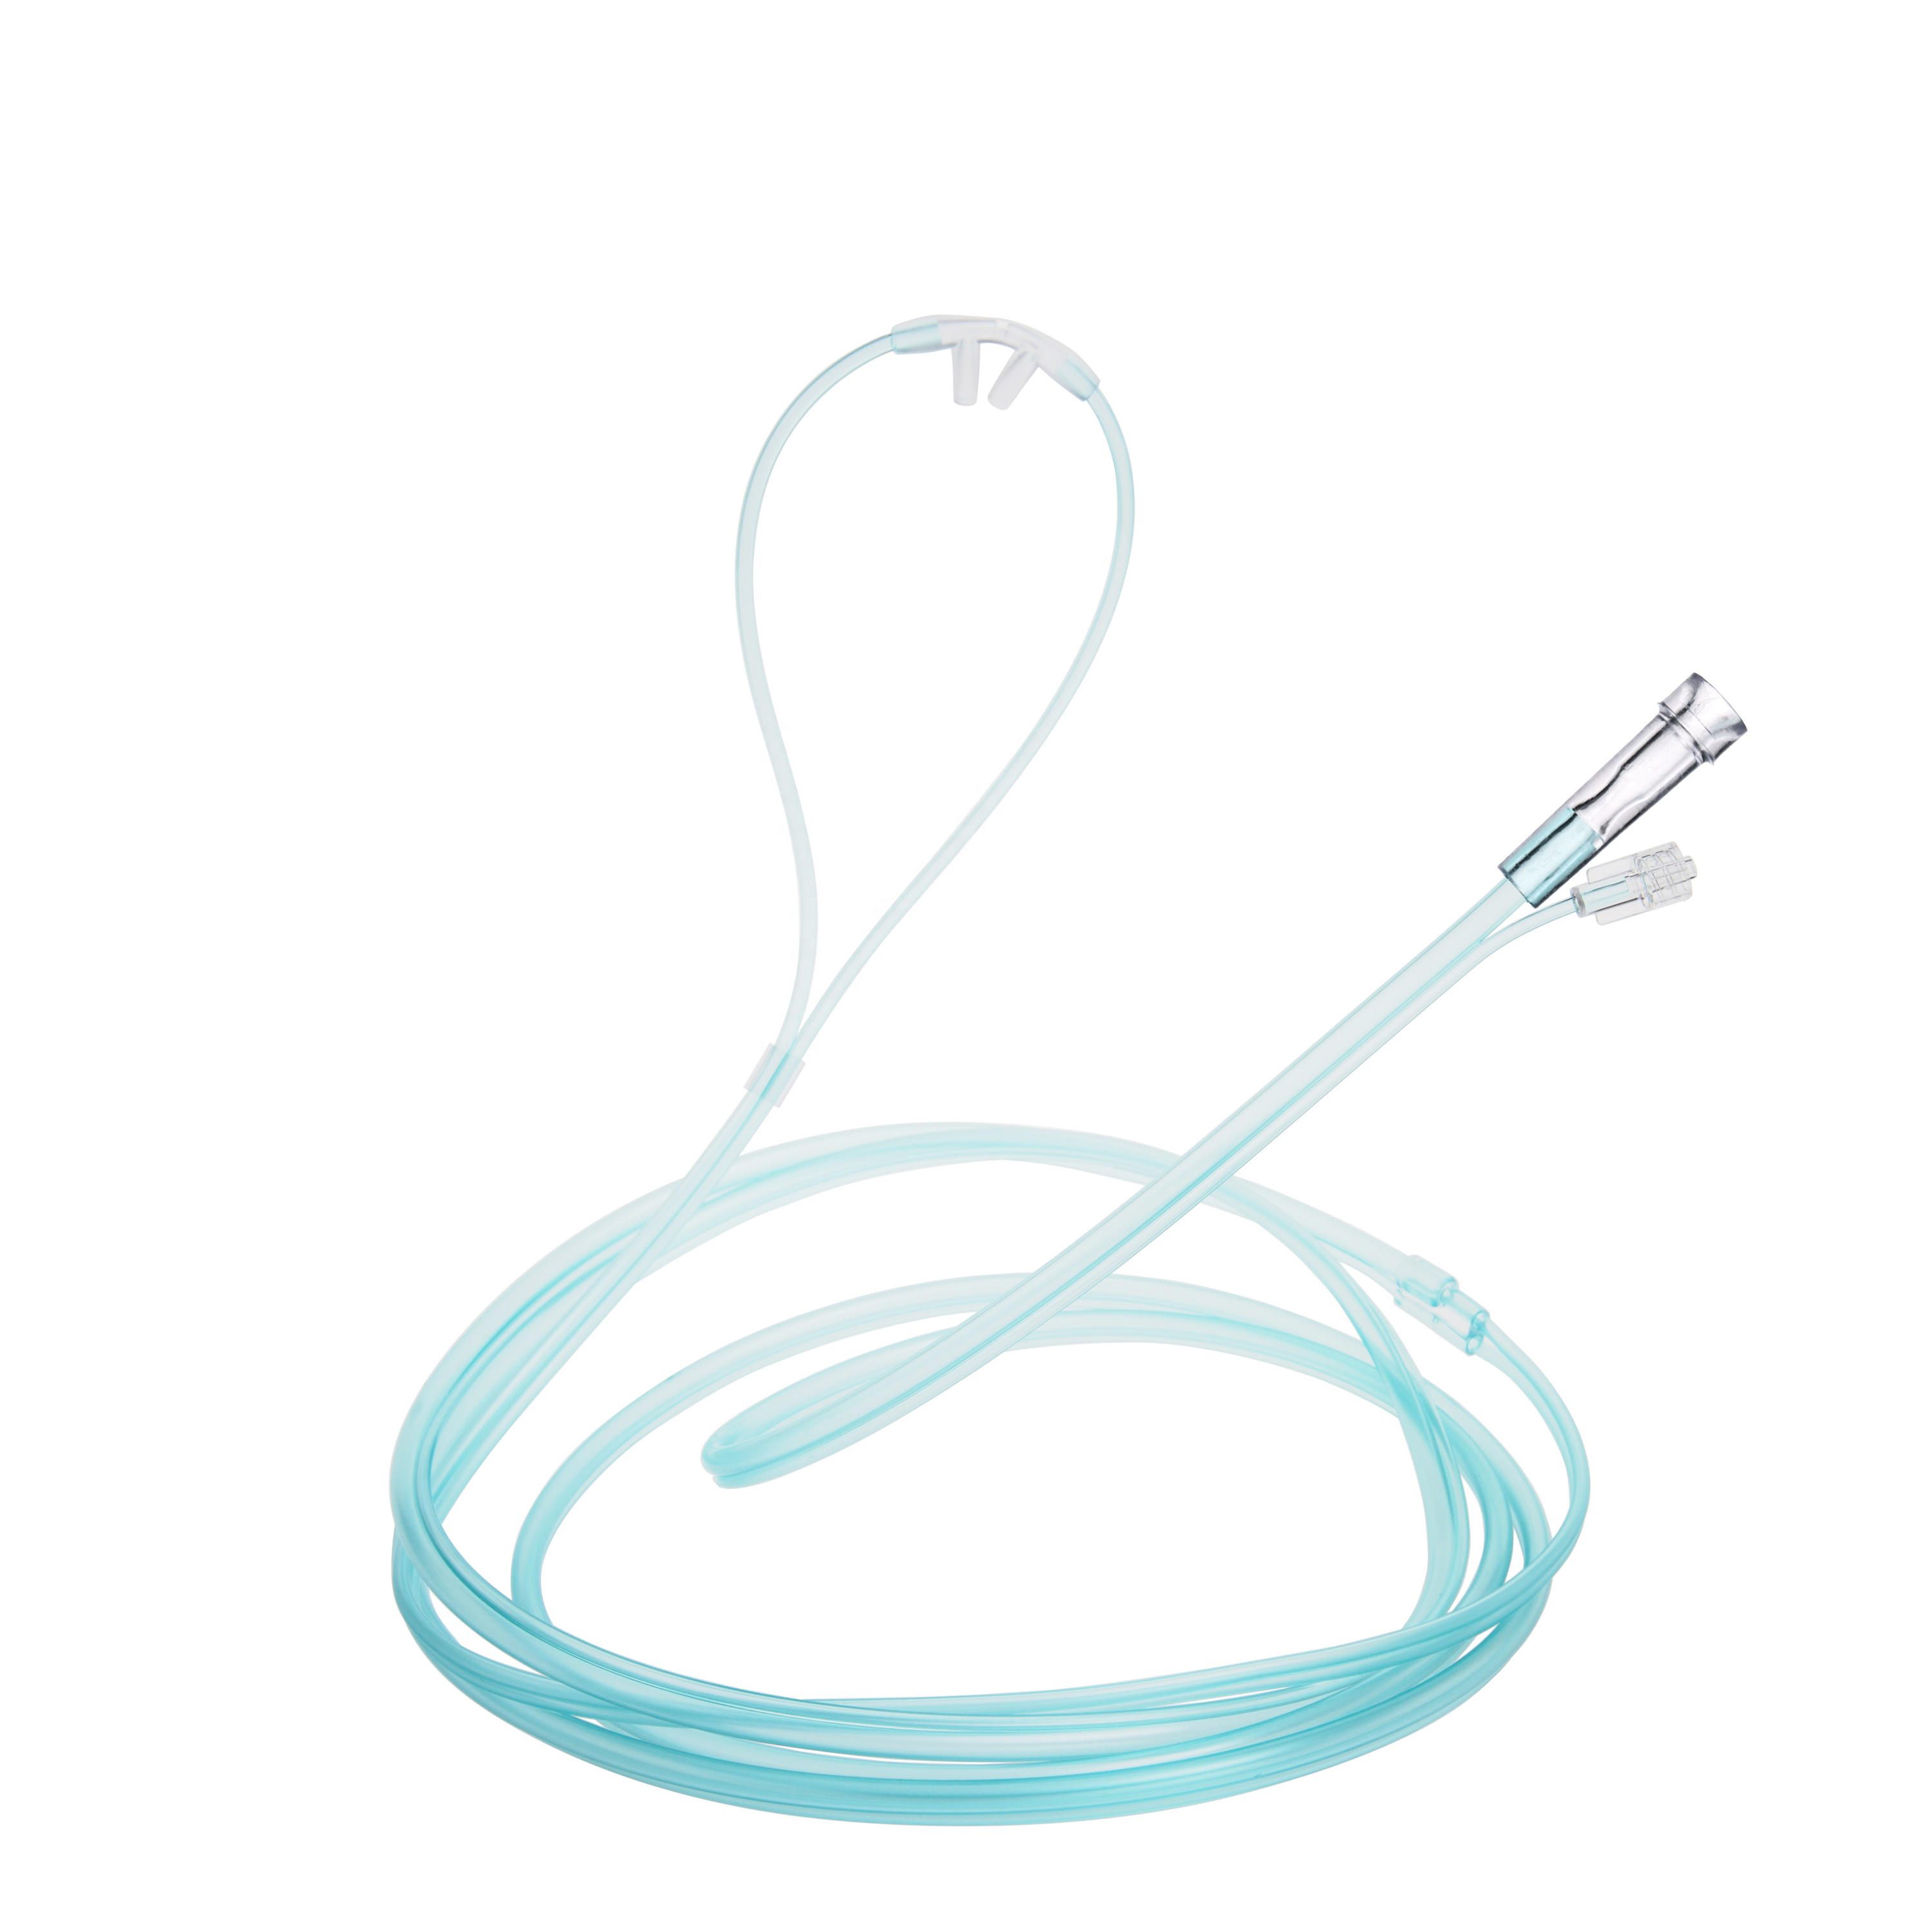 A disposable mucus extractor is a medical device that helps remove mucus